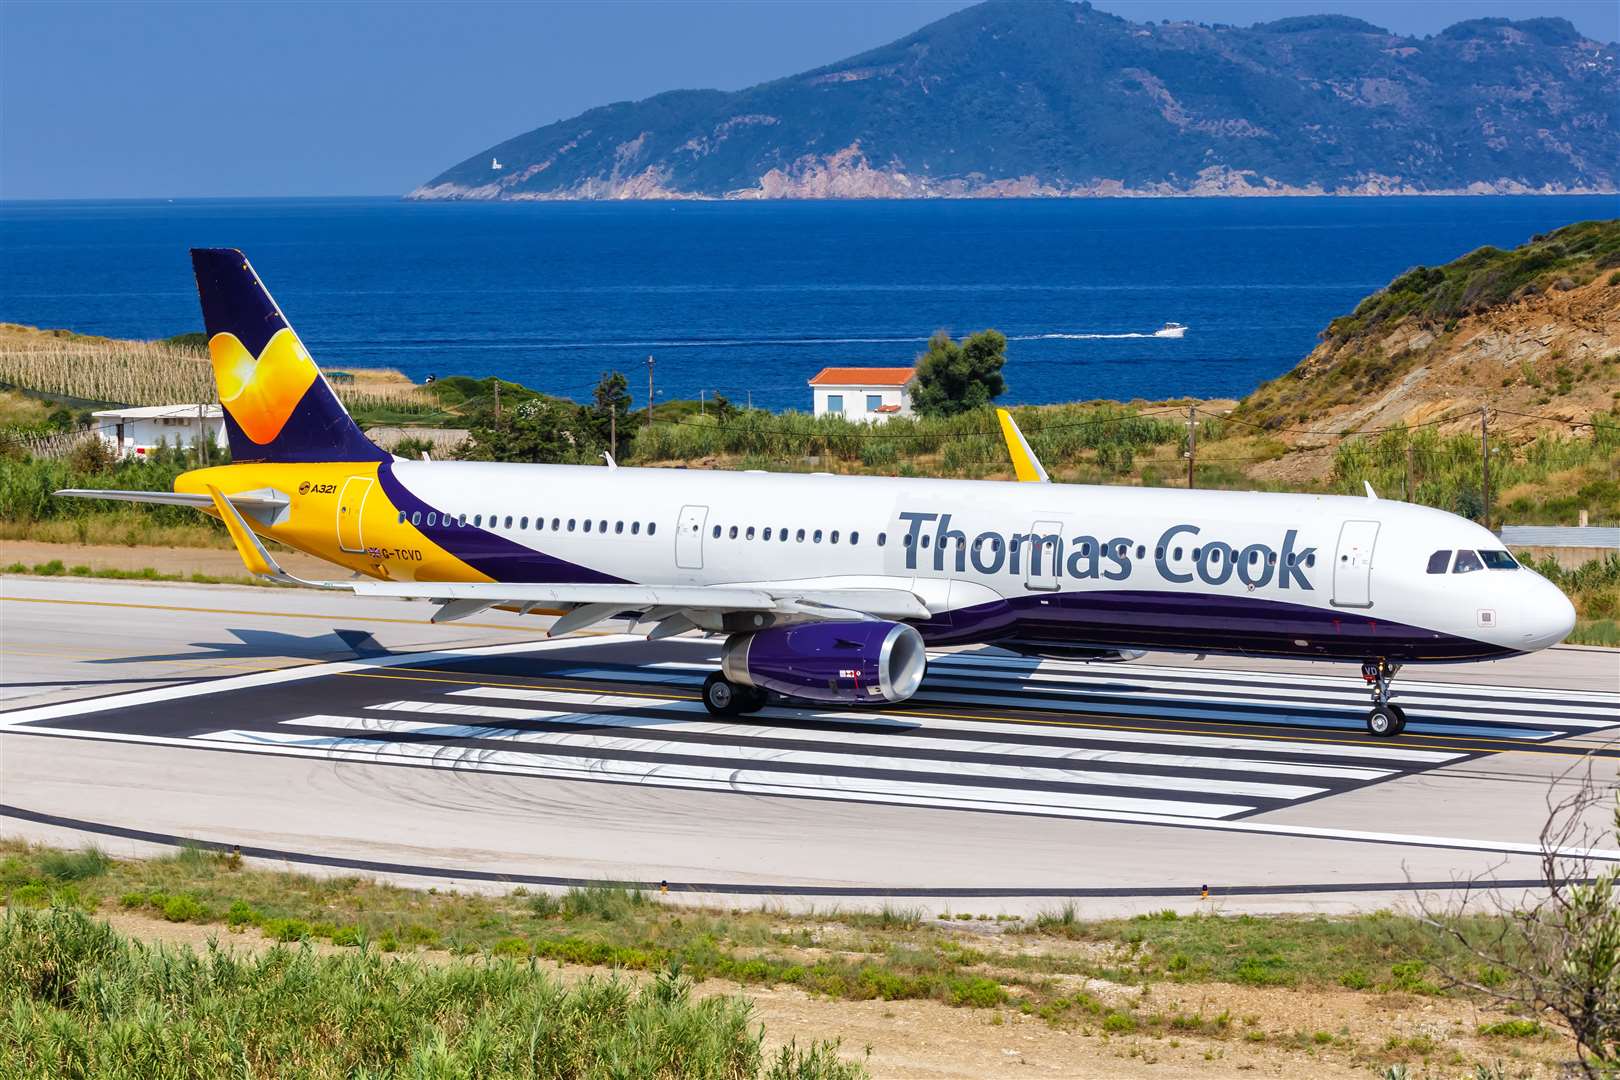 Thomas Cook went out of business after 178 years, leaving 150,000 UK travellers stranded.